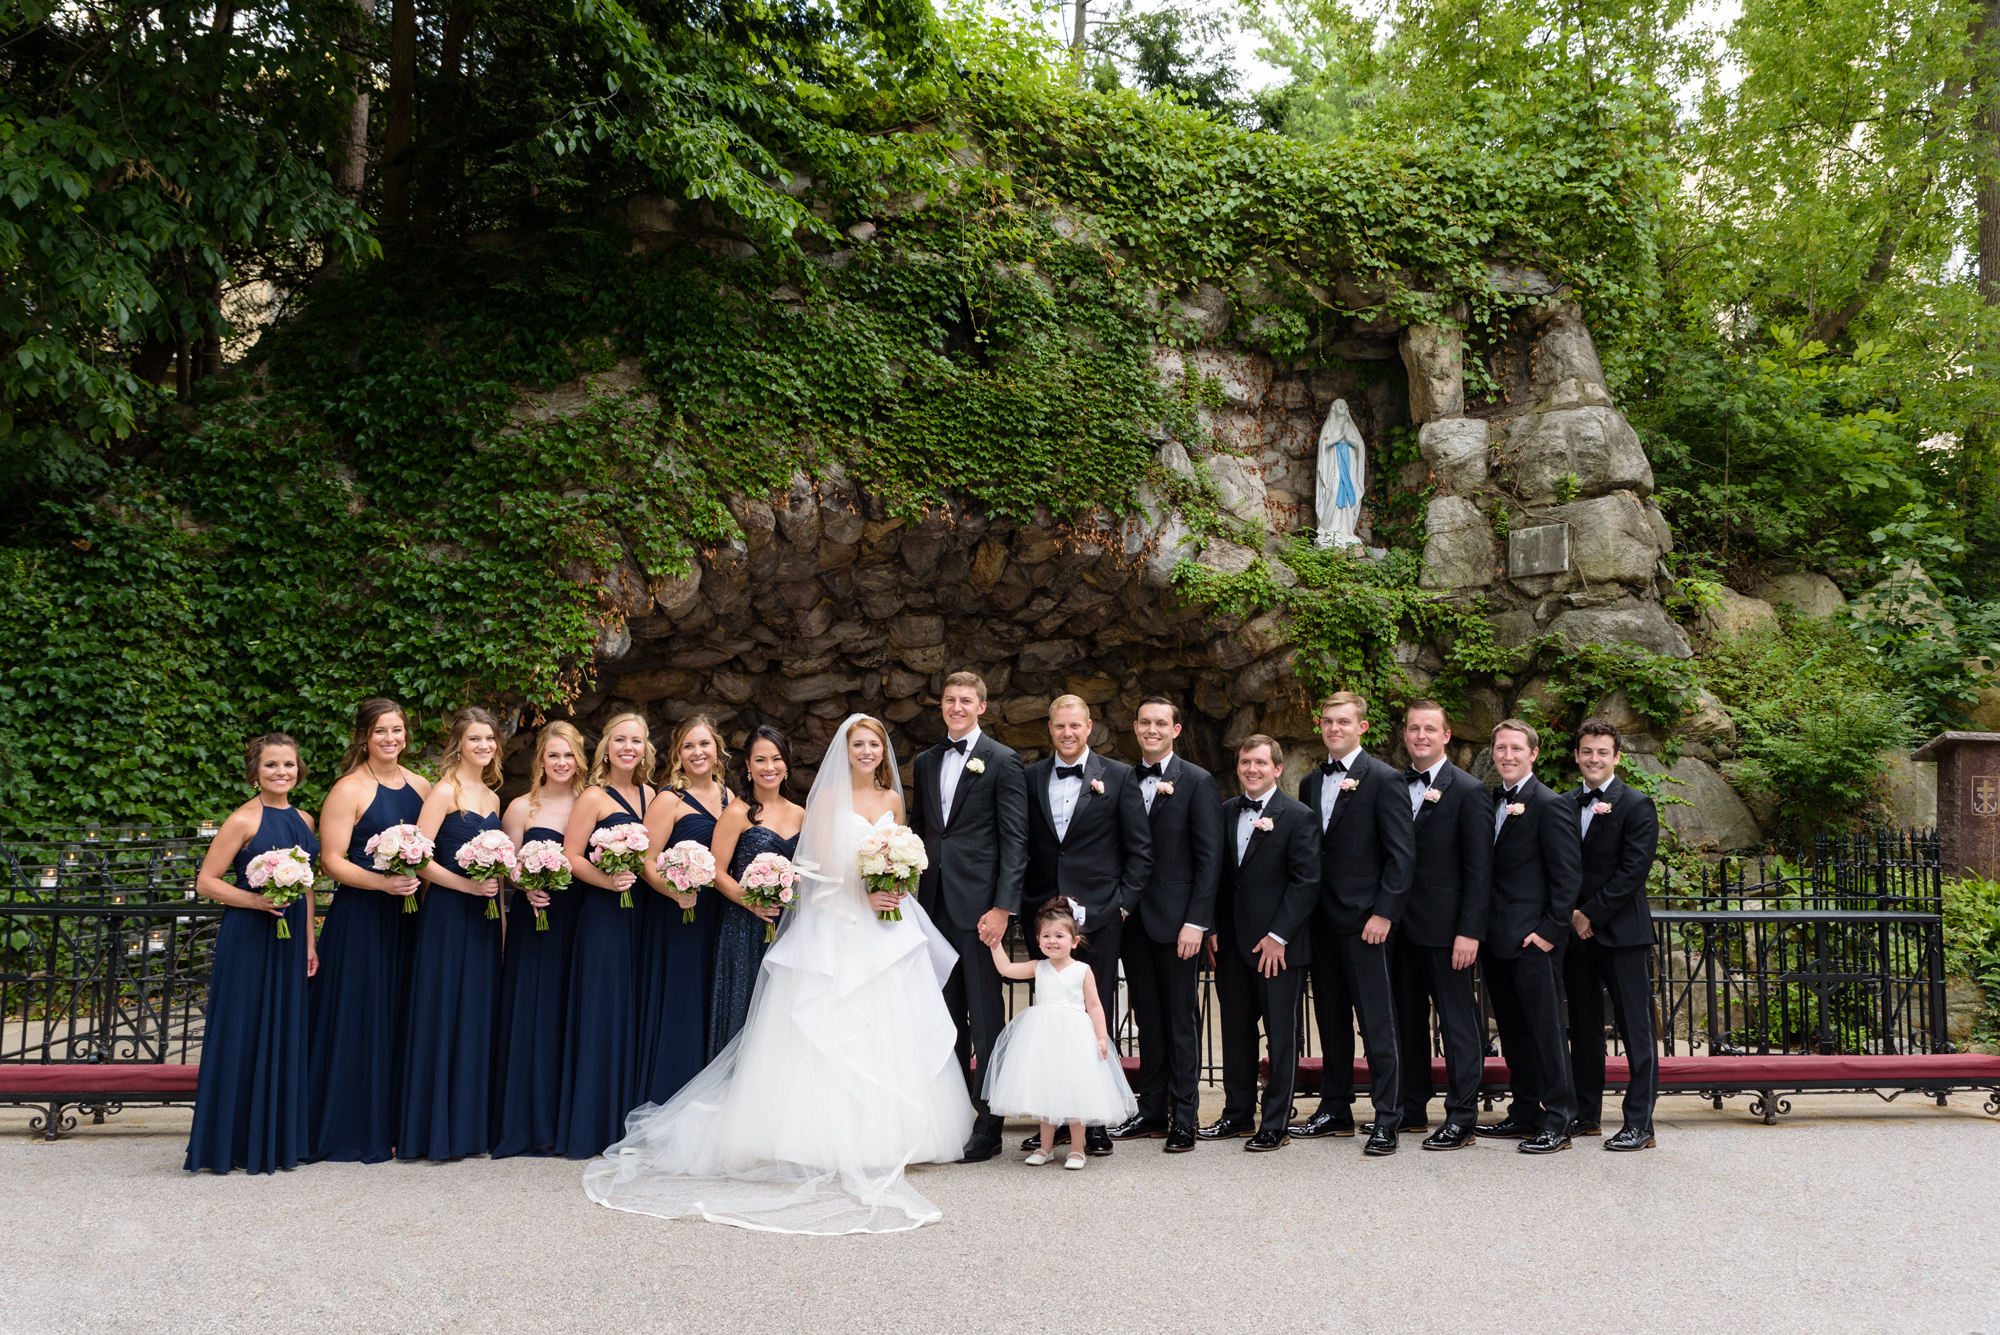 Bridal Party at the Grotto after their wedding ceremony at the Basilica of the Sacred Heart on the campus of the University of Notre Dame